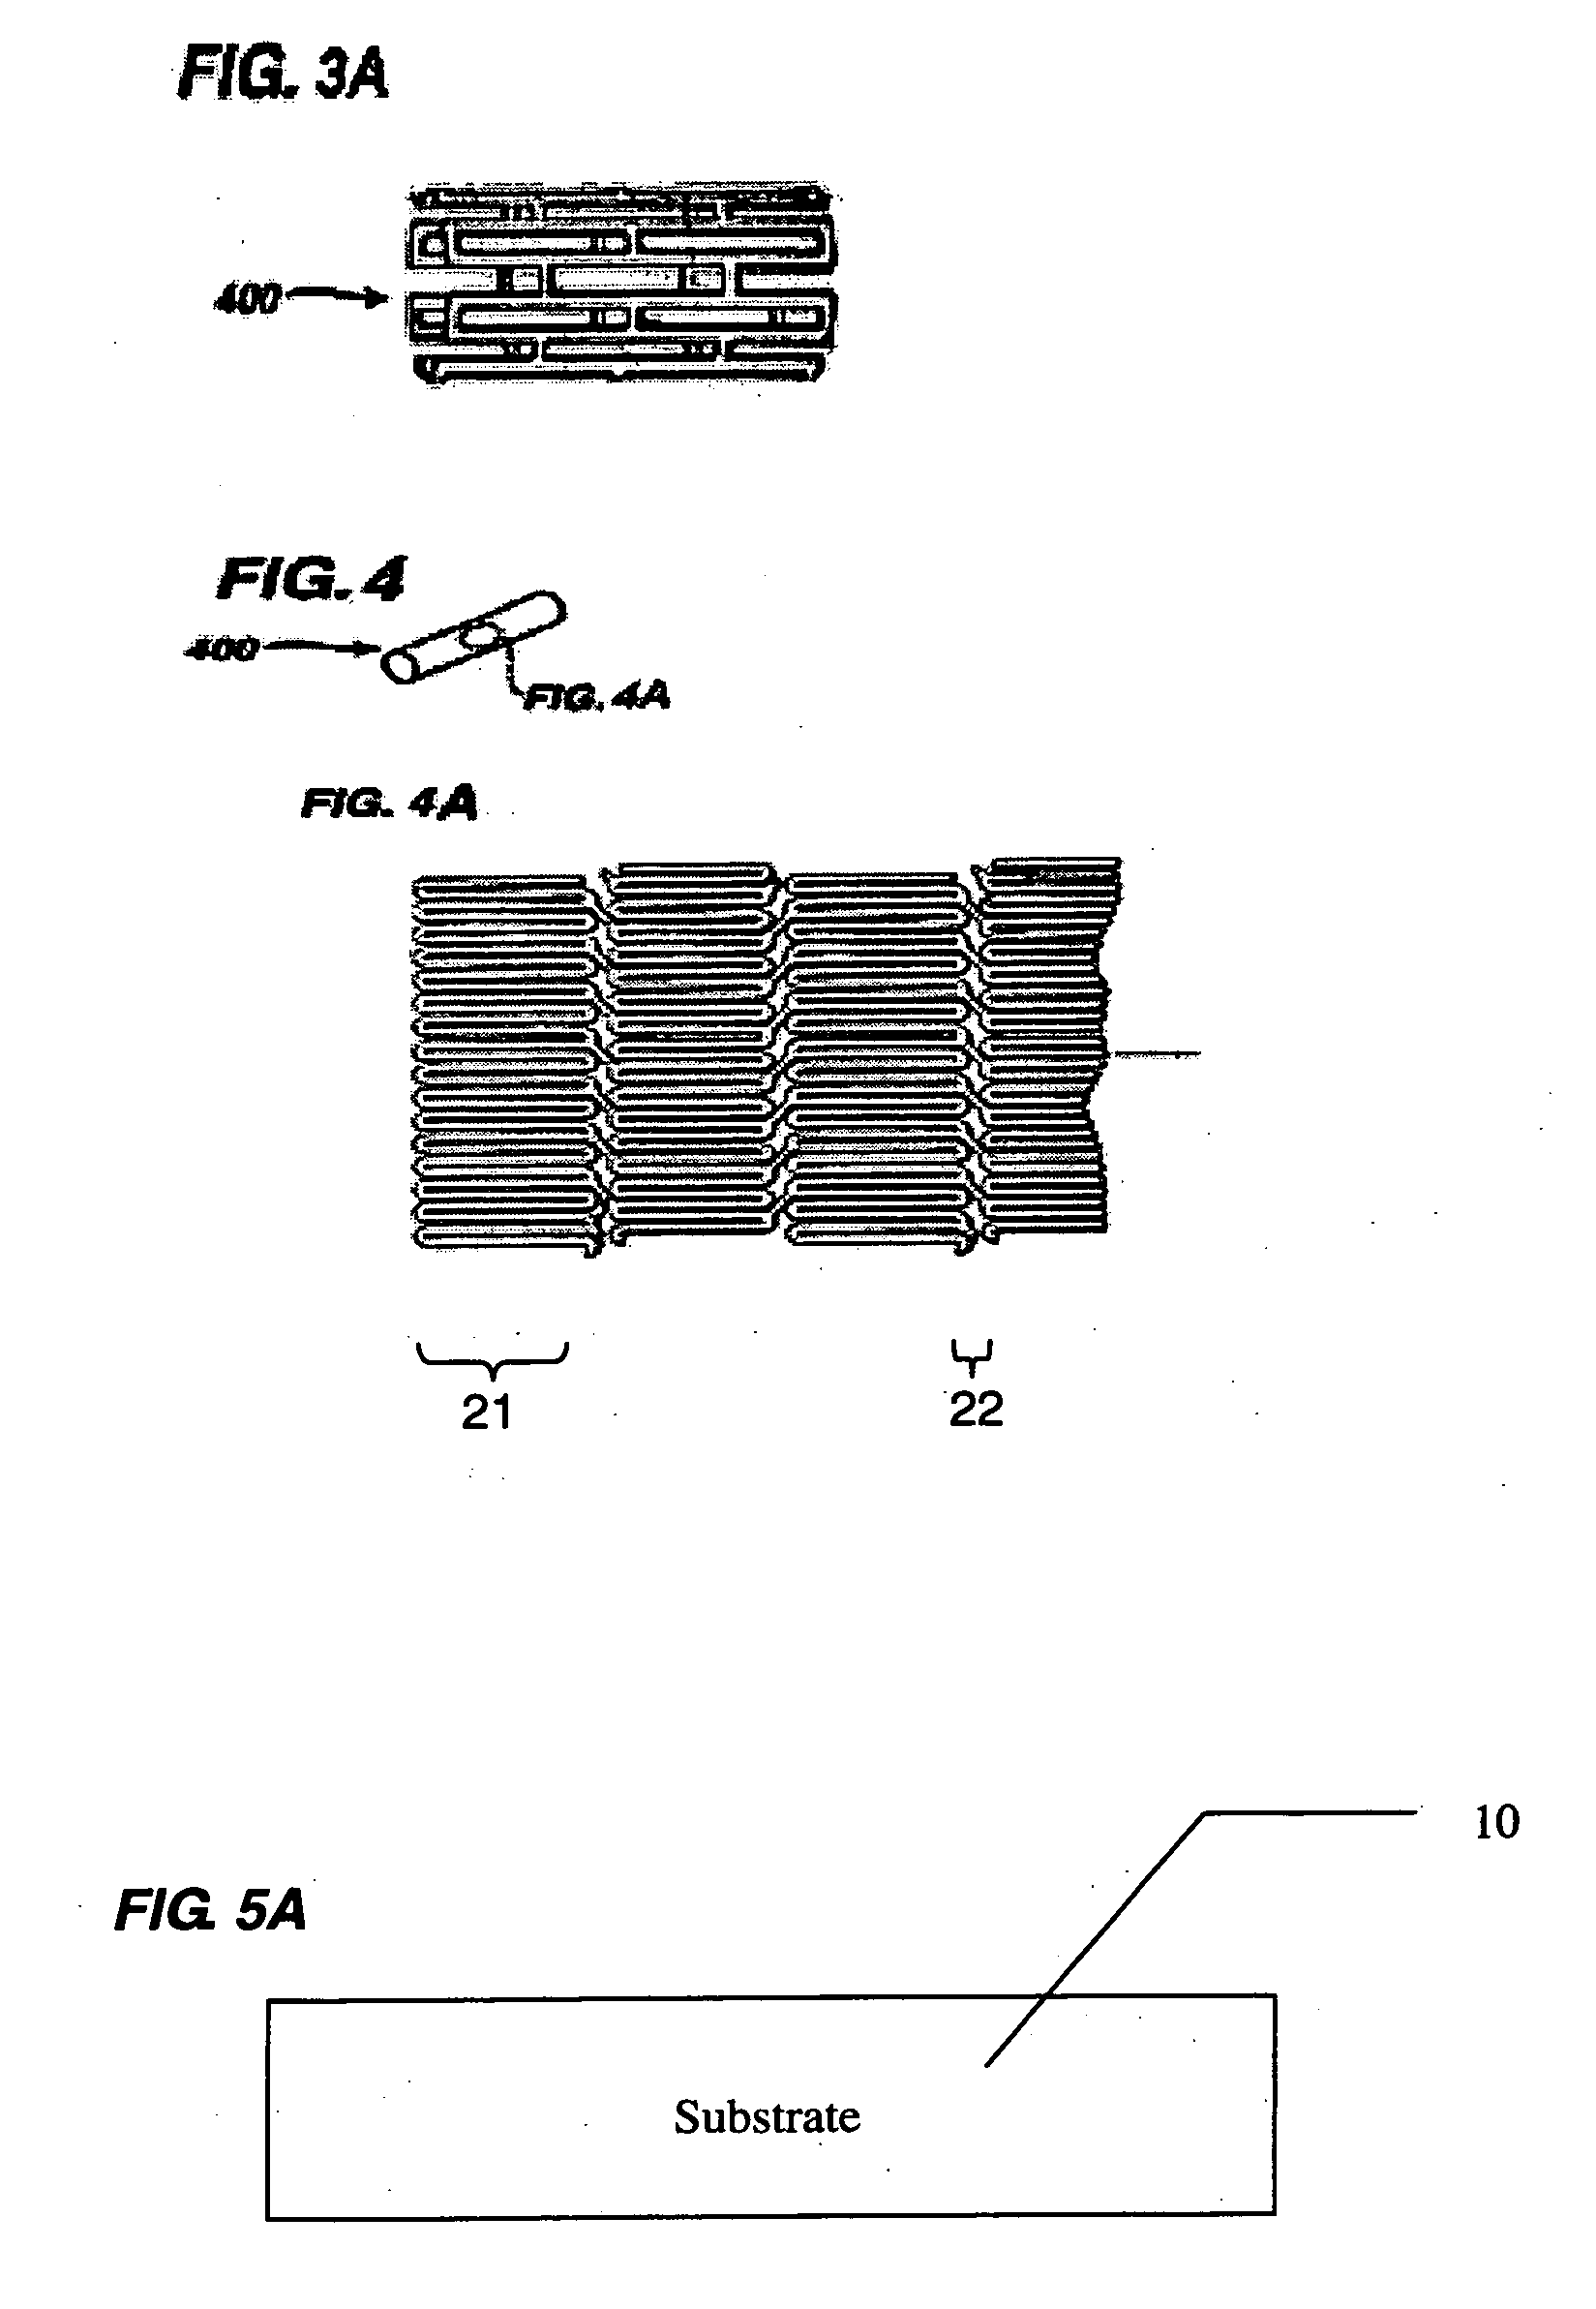 Biodegradable medical devices with enhanced mechanical strength and pharmacological functions